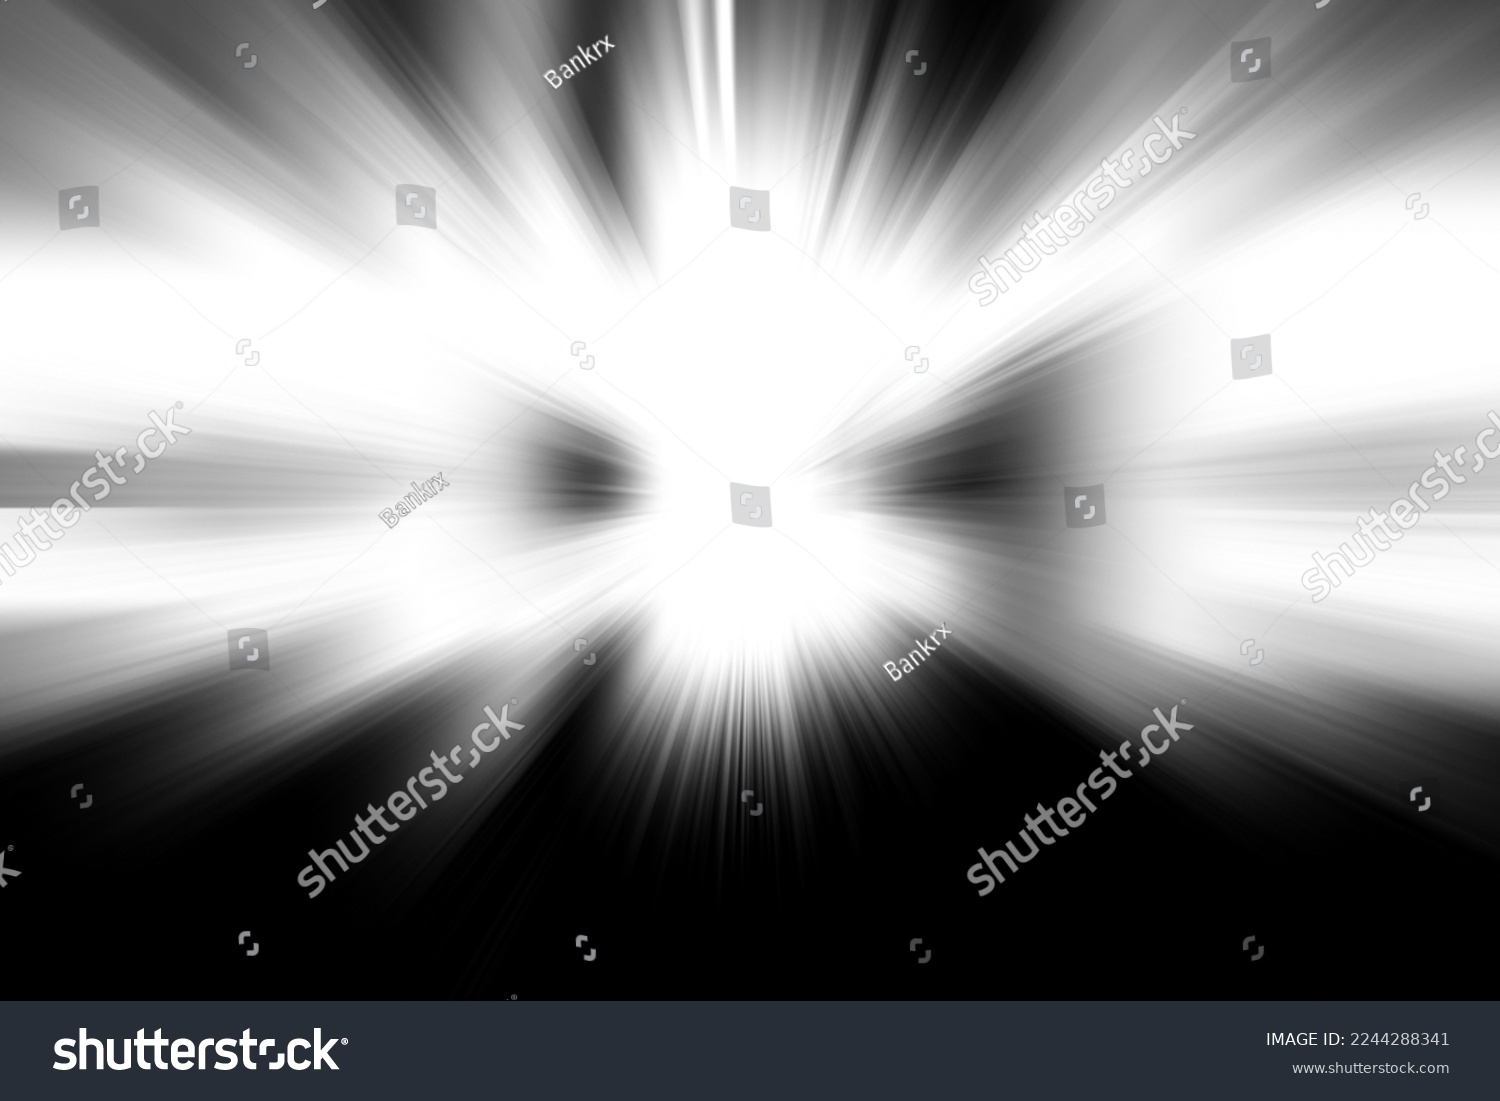 Balck line as speed movement or explosion or zoom usage on white background #2244288341